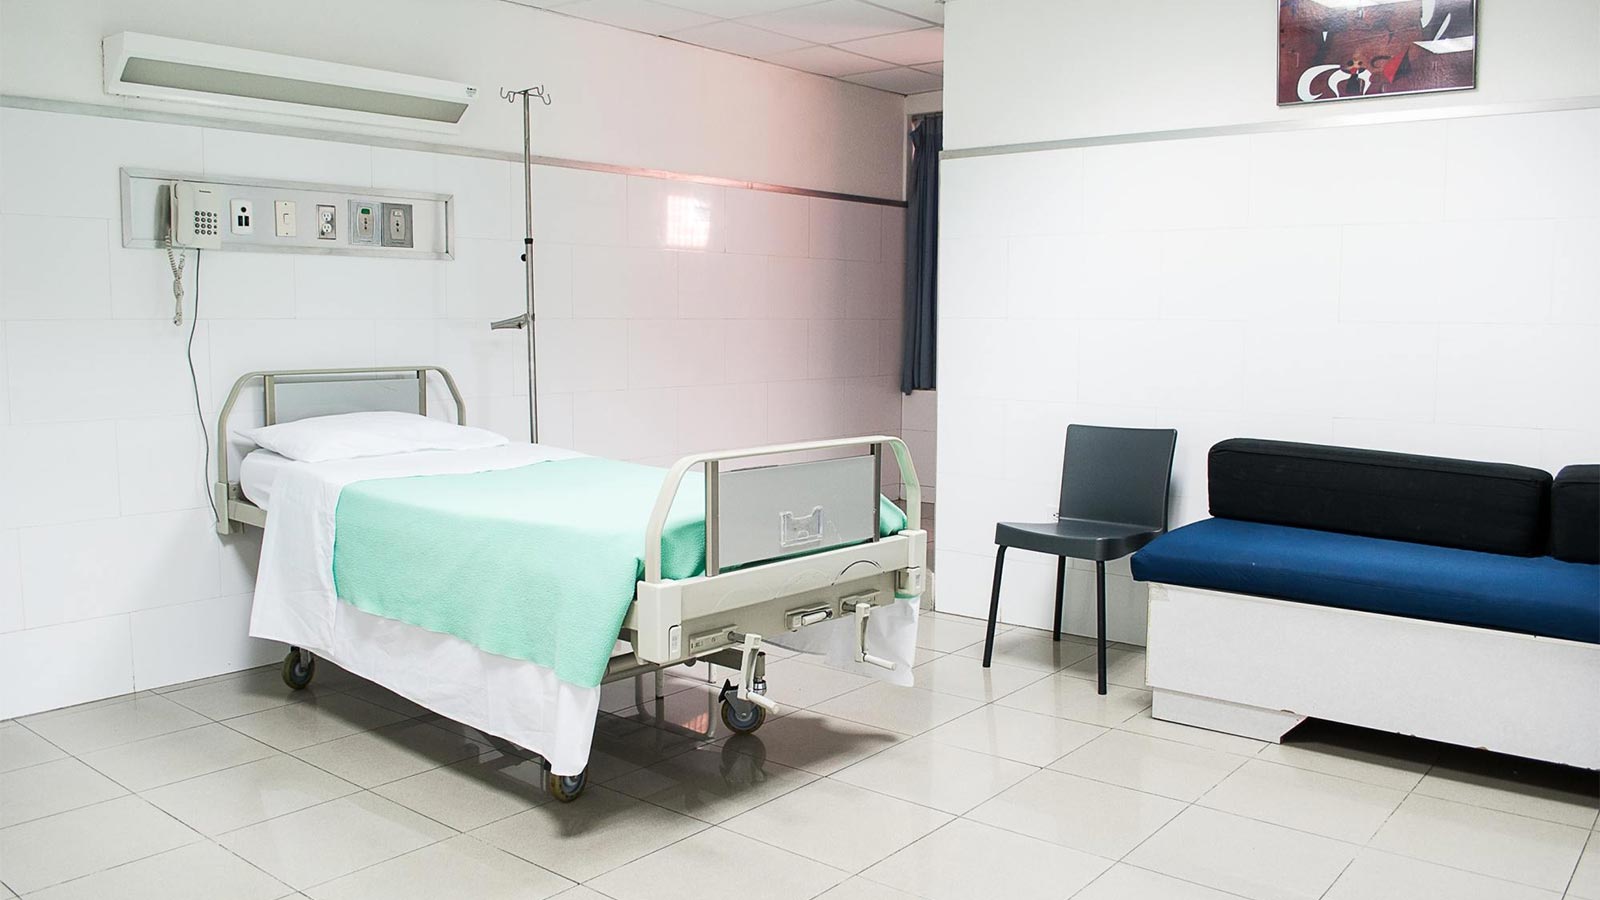 FPE Seals provide cylinder components for hospital patient trolley refurbishment